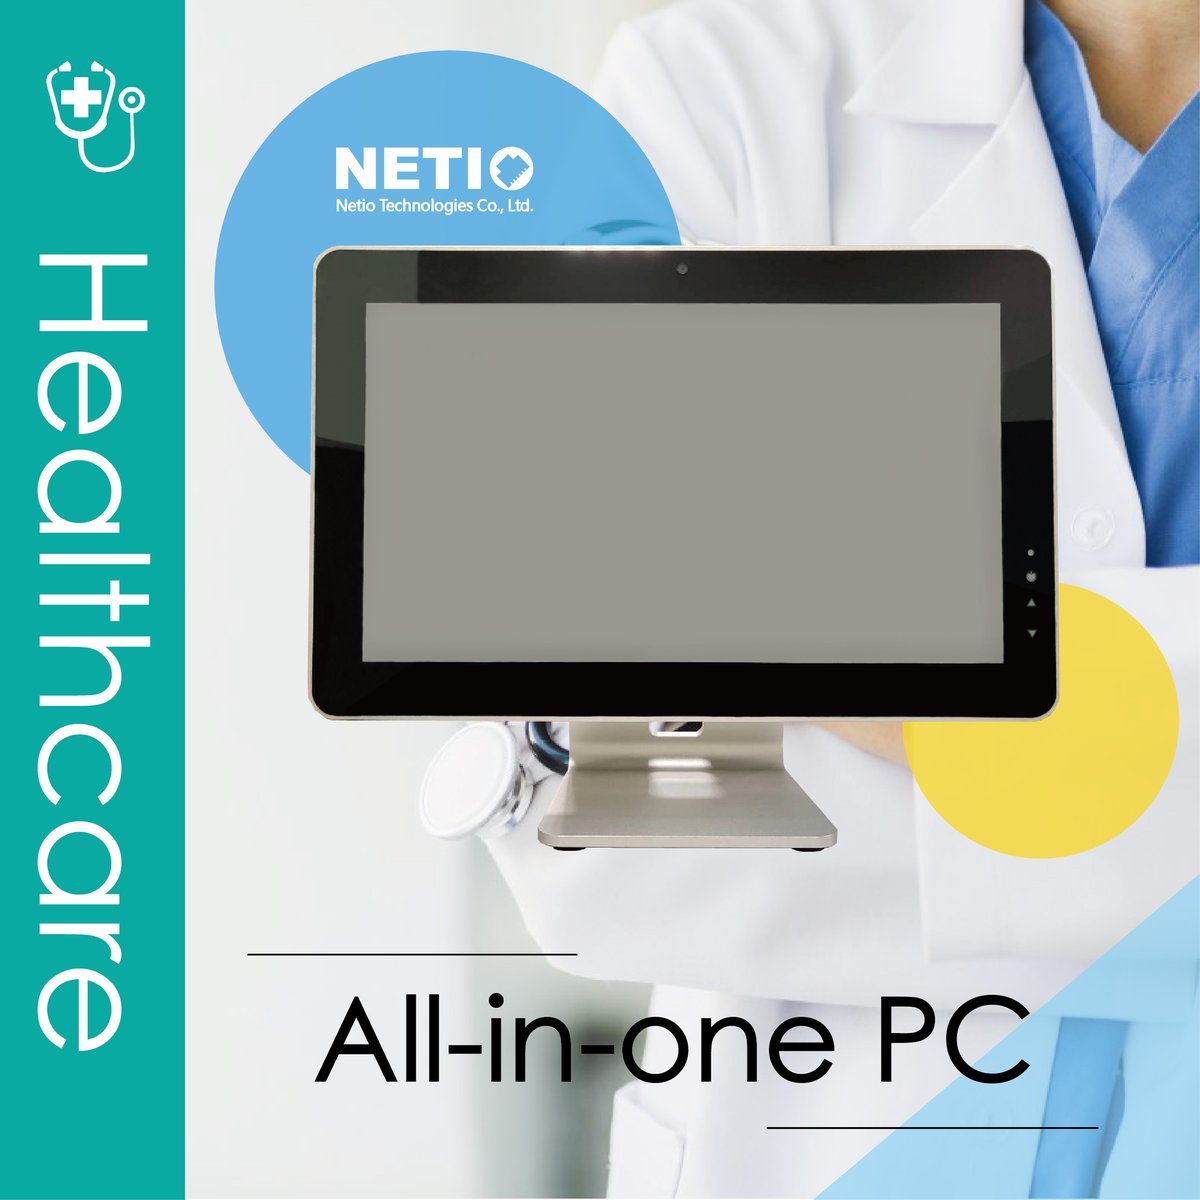 Netiotek PPC-1560- All-in-one industrial-grade Panel Computer has demonstrated experience in medical care uses. Its fanless design also suits any industrial applications that need to be rugged.